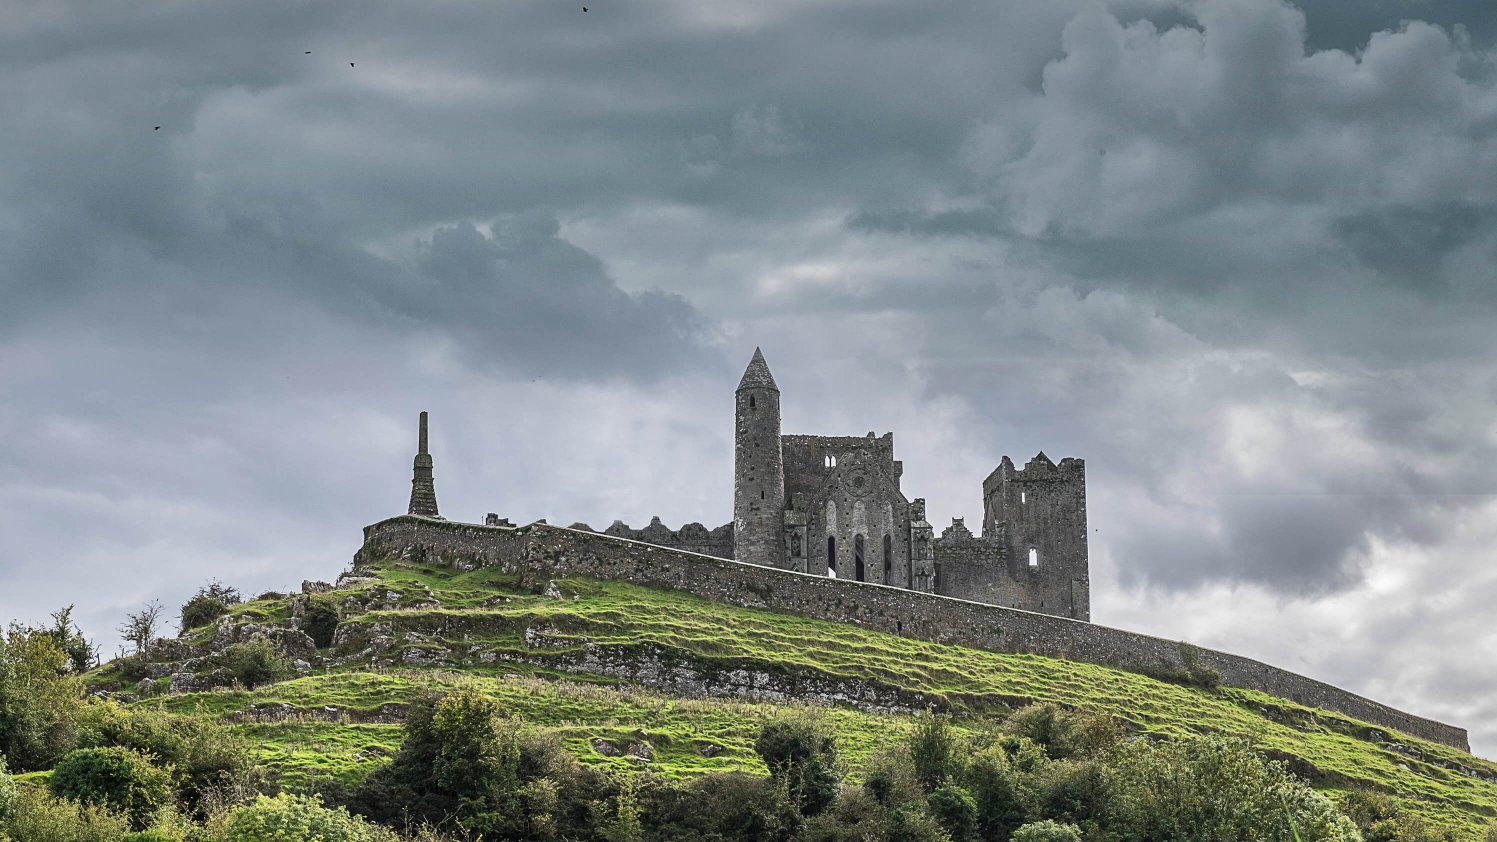 The monumental Rock of Cashel rises above the green Tipperary landscape